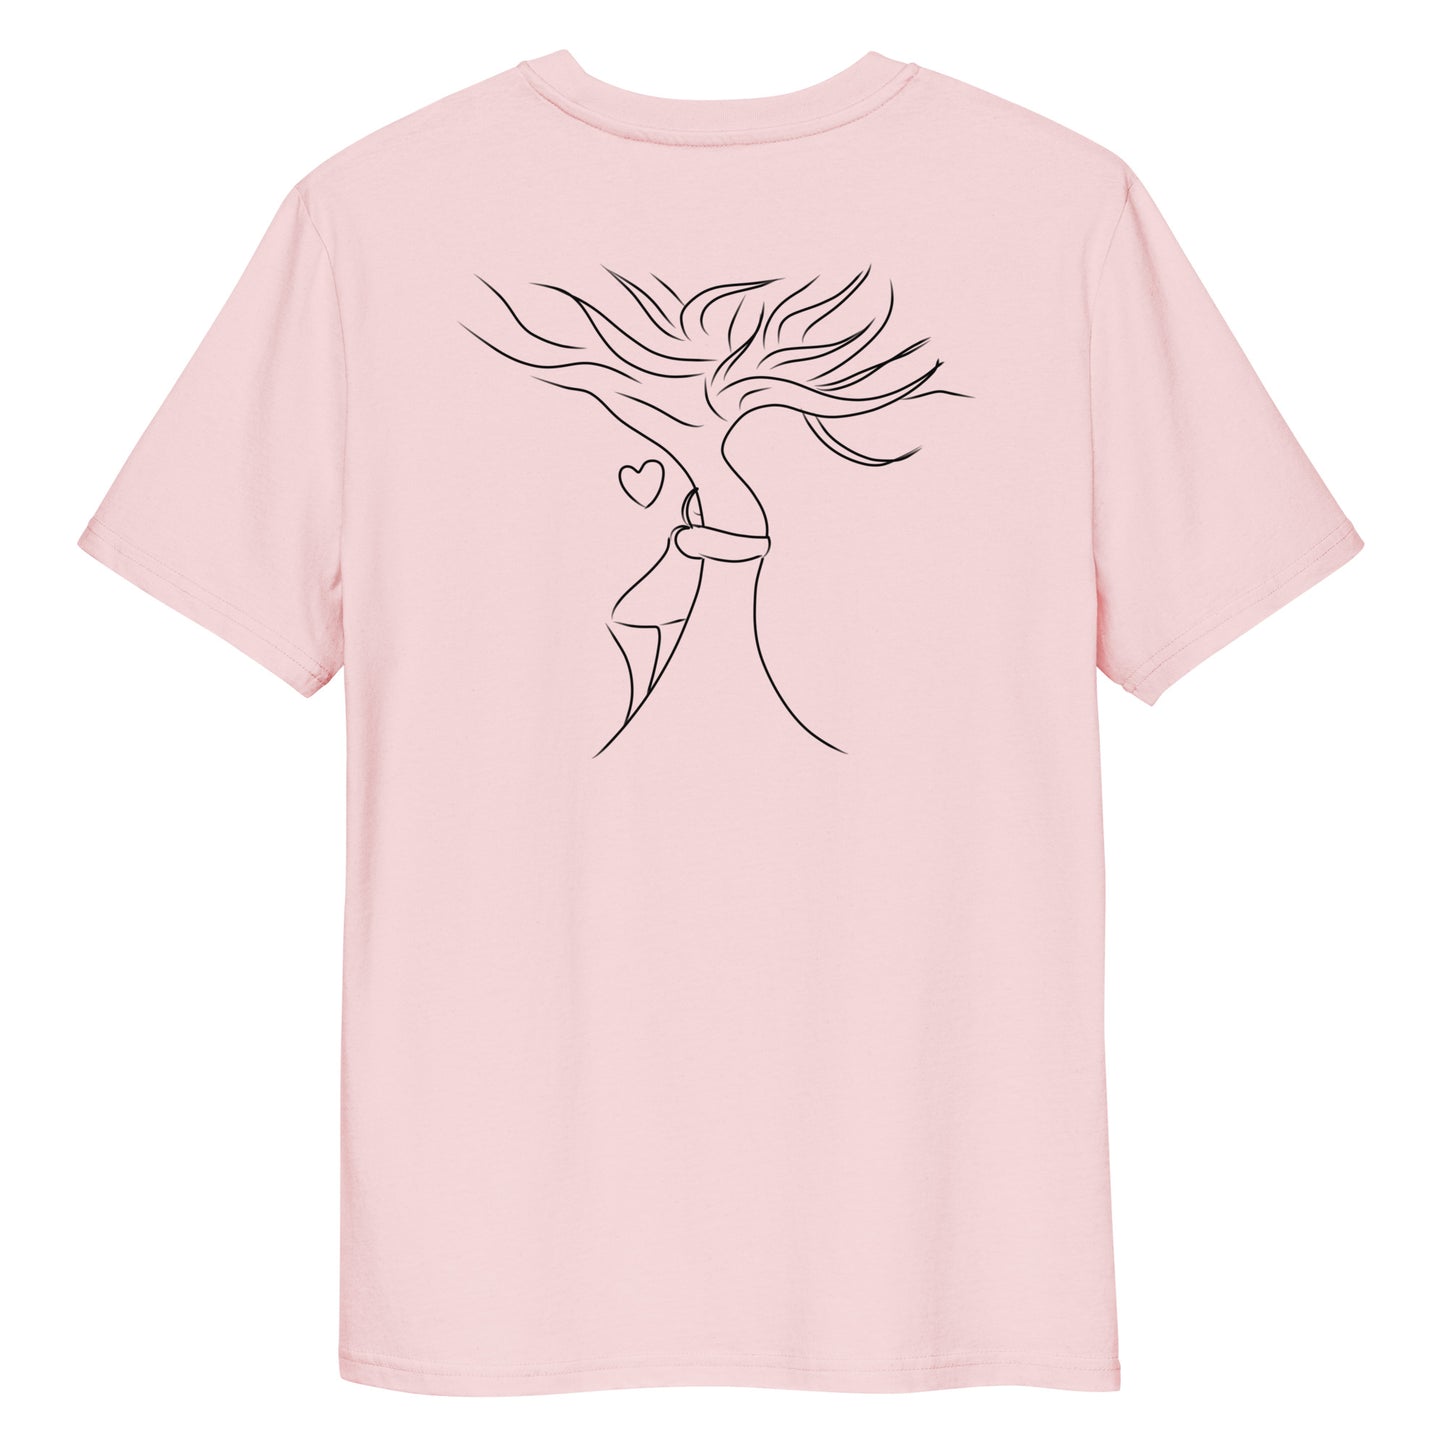 Sustainable Embrace Tree | 100% Organic Cotton T Shirt in pink back